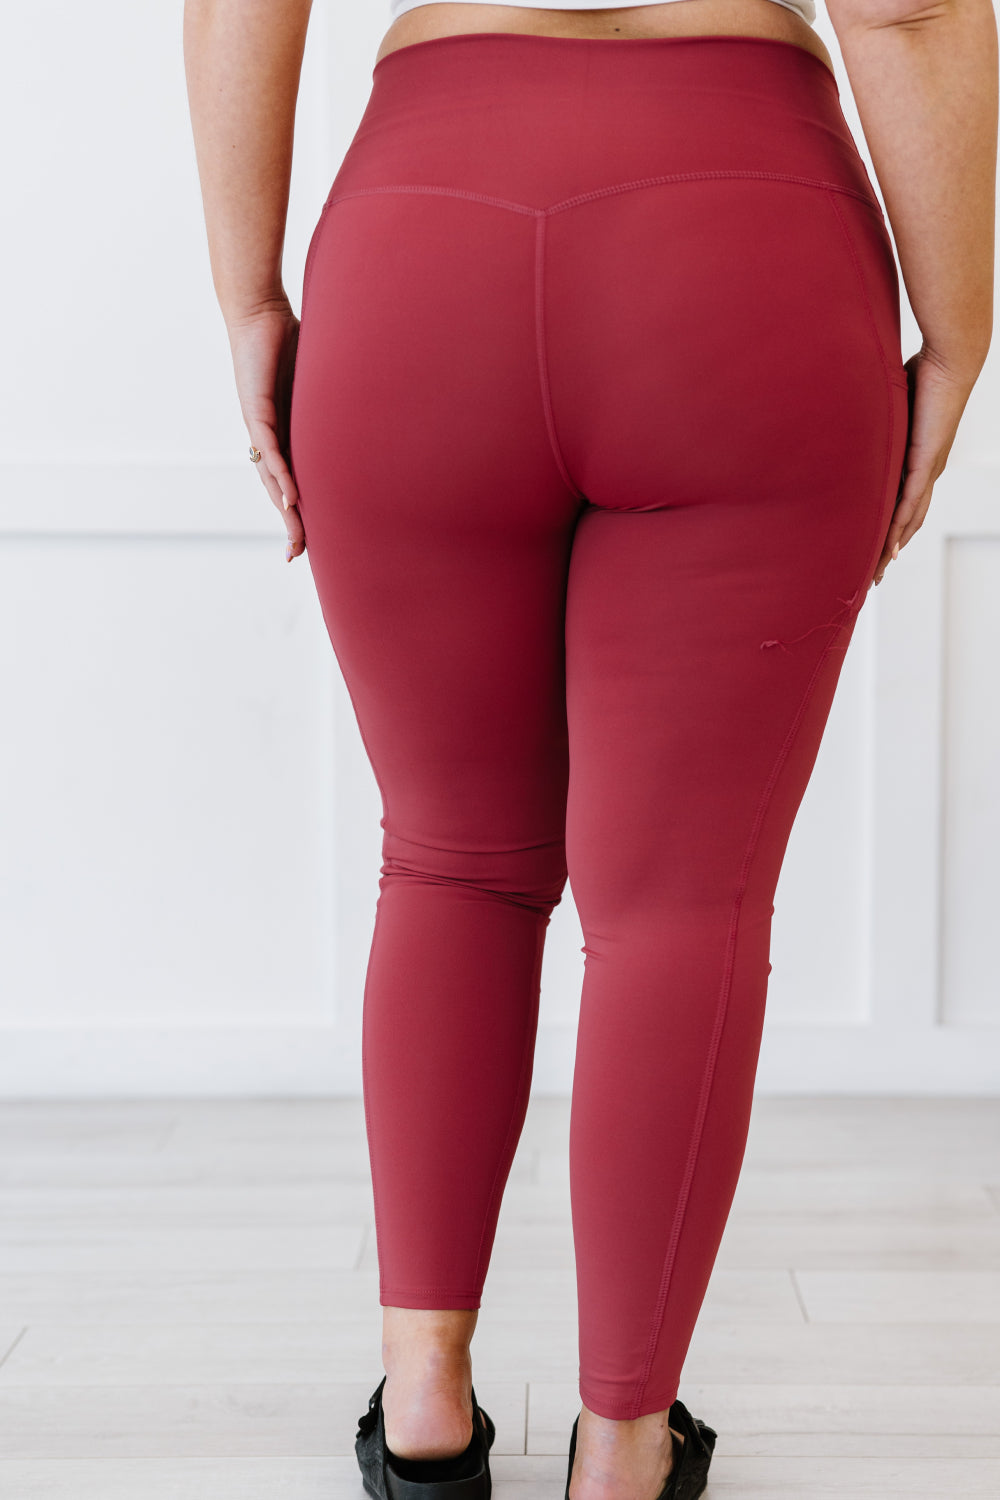 In Full Stride Athletic Leggings with Pockets in Rose   